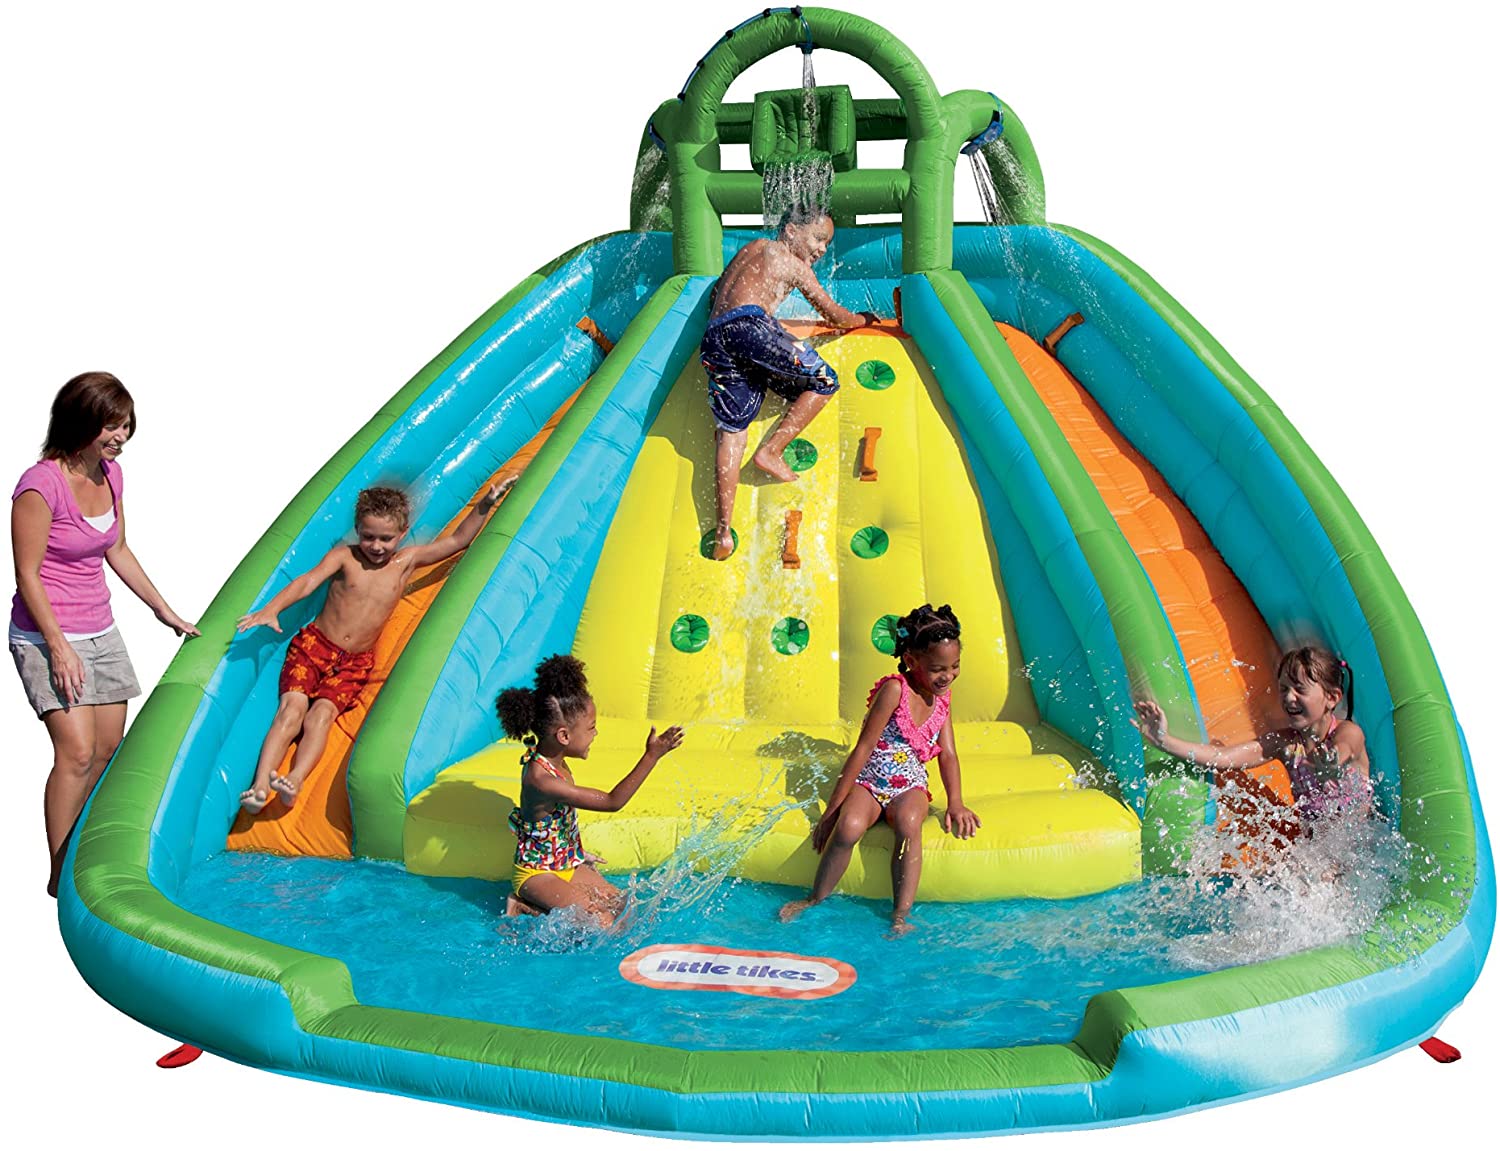 Little Tikes Rocky Mountain River Race Inflatable Slide Bouncer Multicolor, 161.00''L x 169.00''W x 103.00''H —- Weight- 50.00lbs.